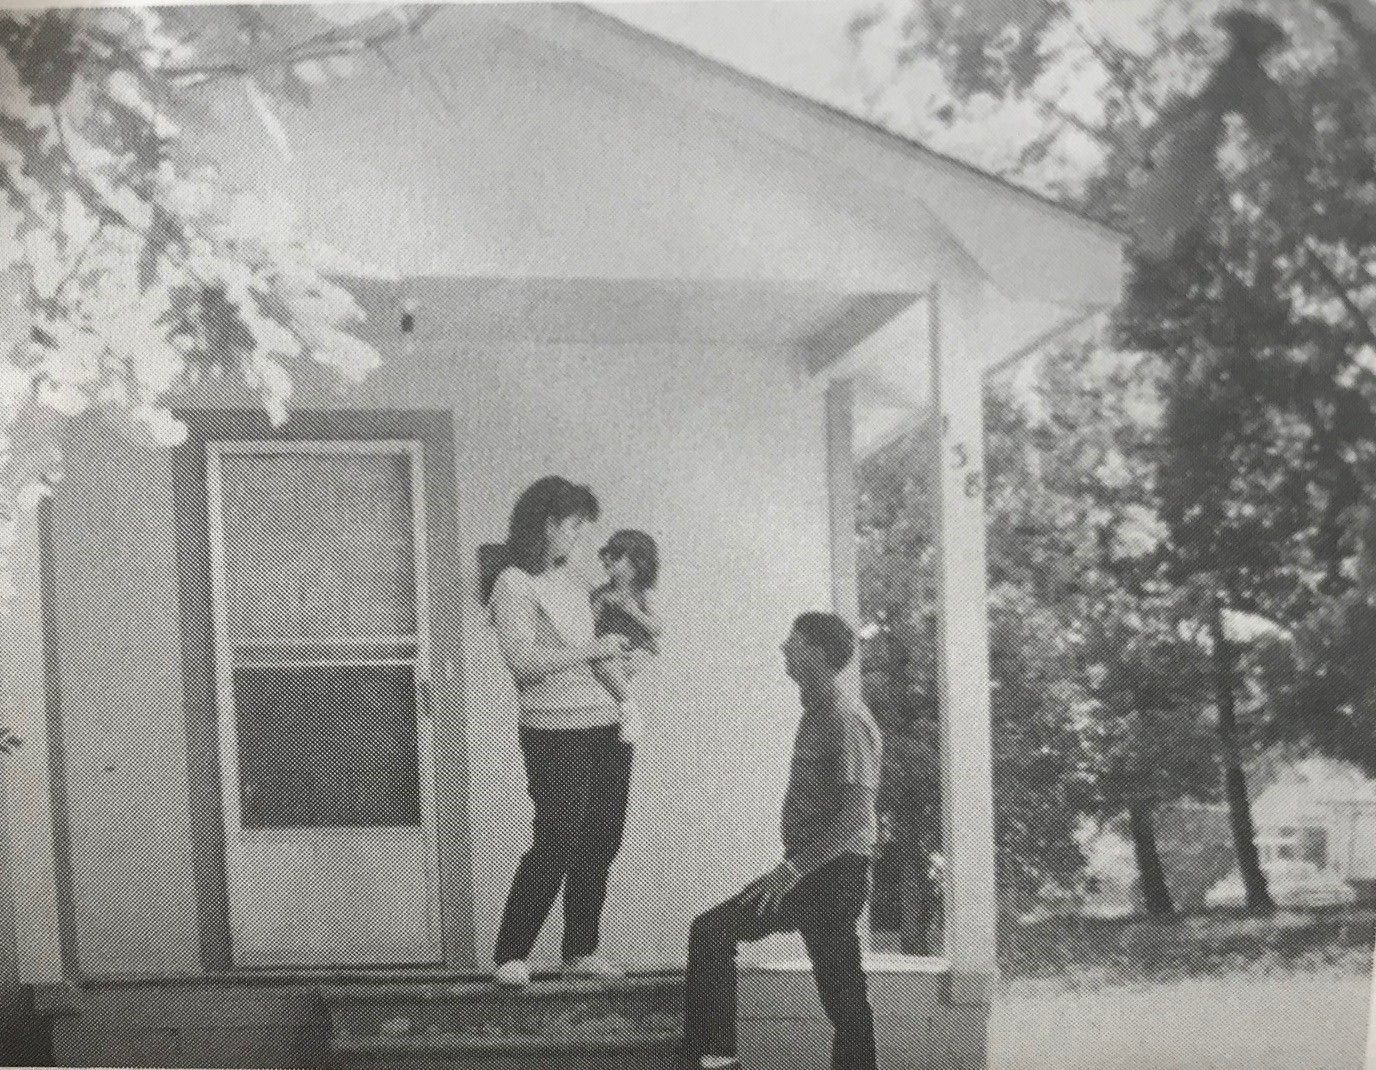 The Miller family stands on their front porch. 